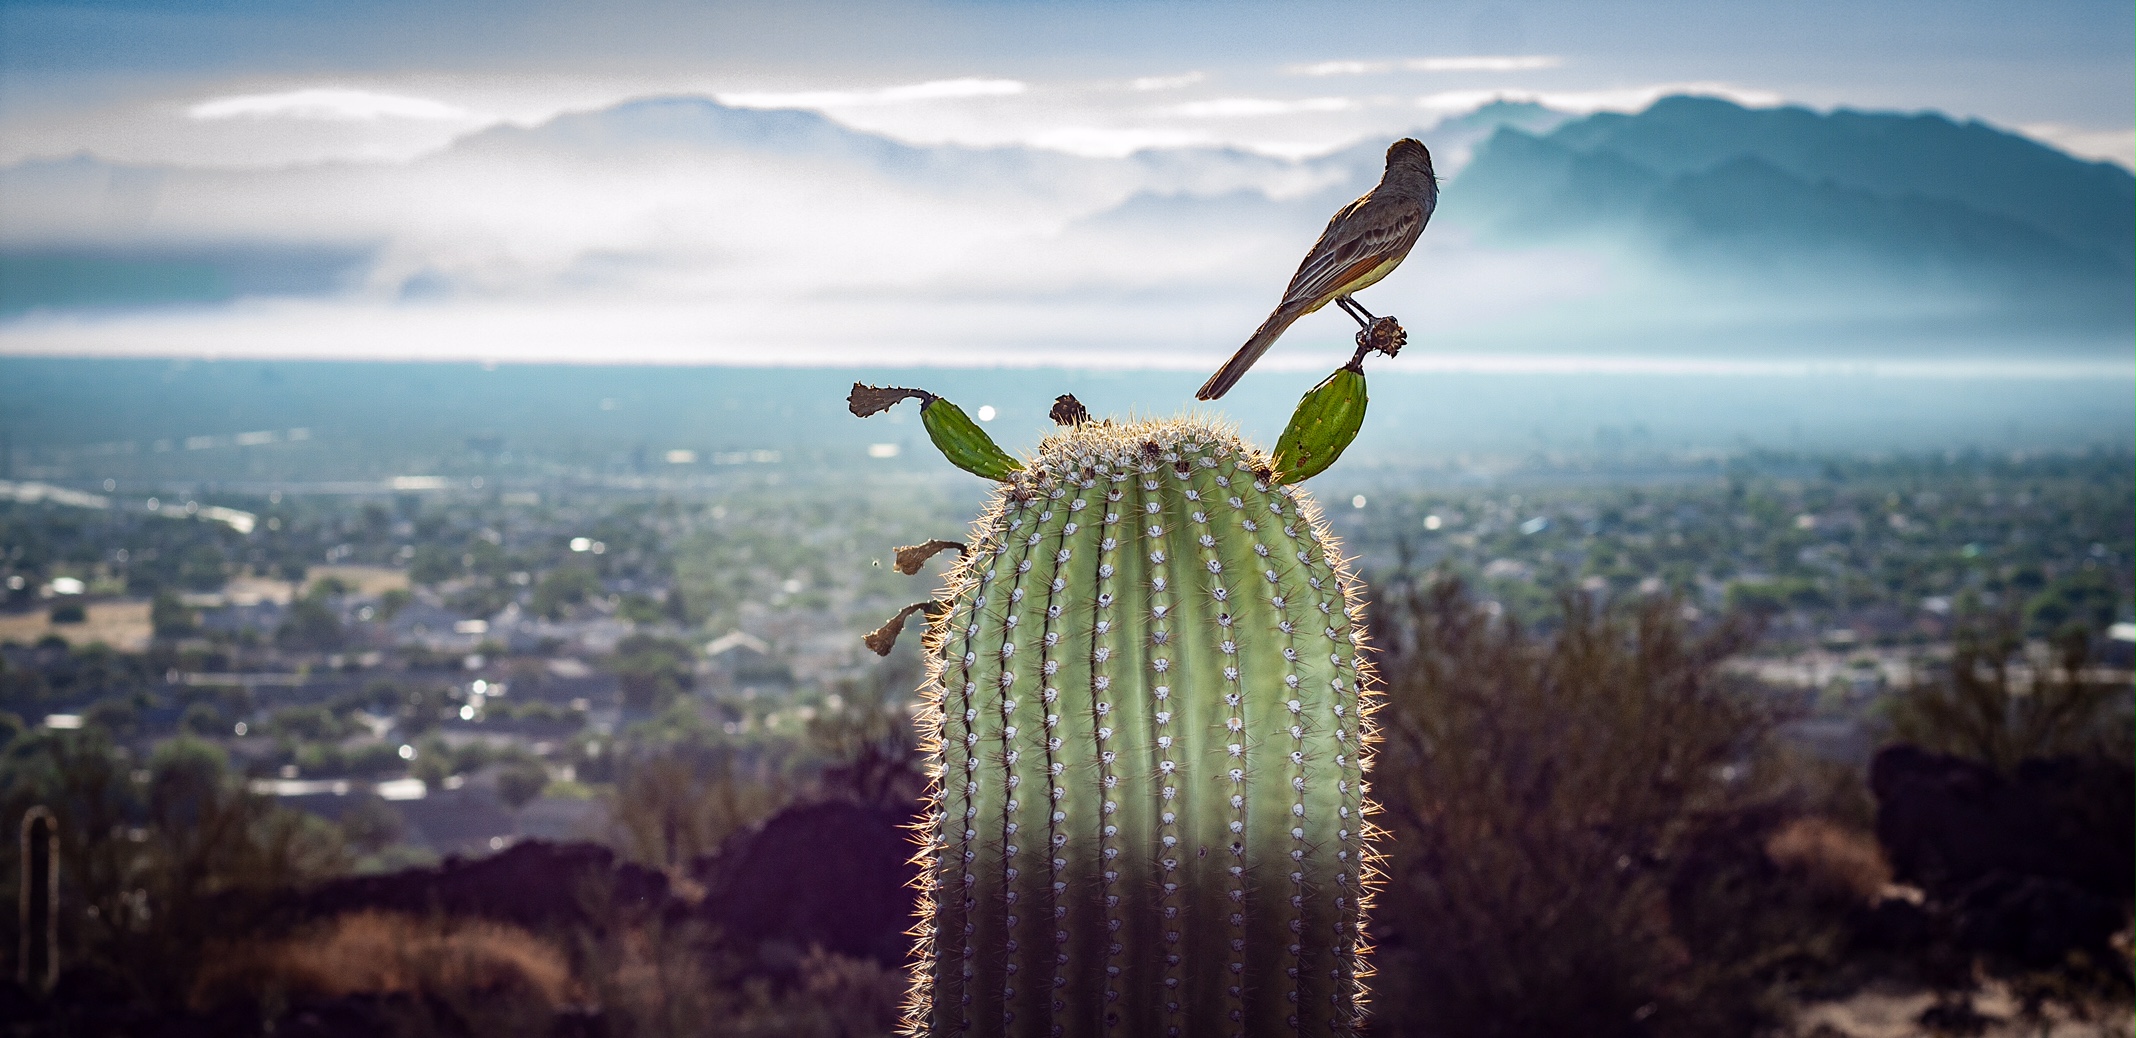 view from across the city of the 2020 Bighorn Fire in the Catalina Mts, with bird perched on fruiting saguaro cactus in the foreground